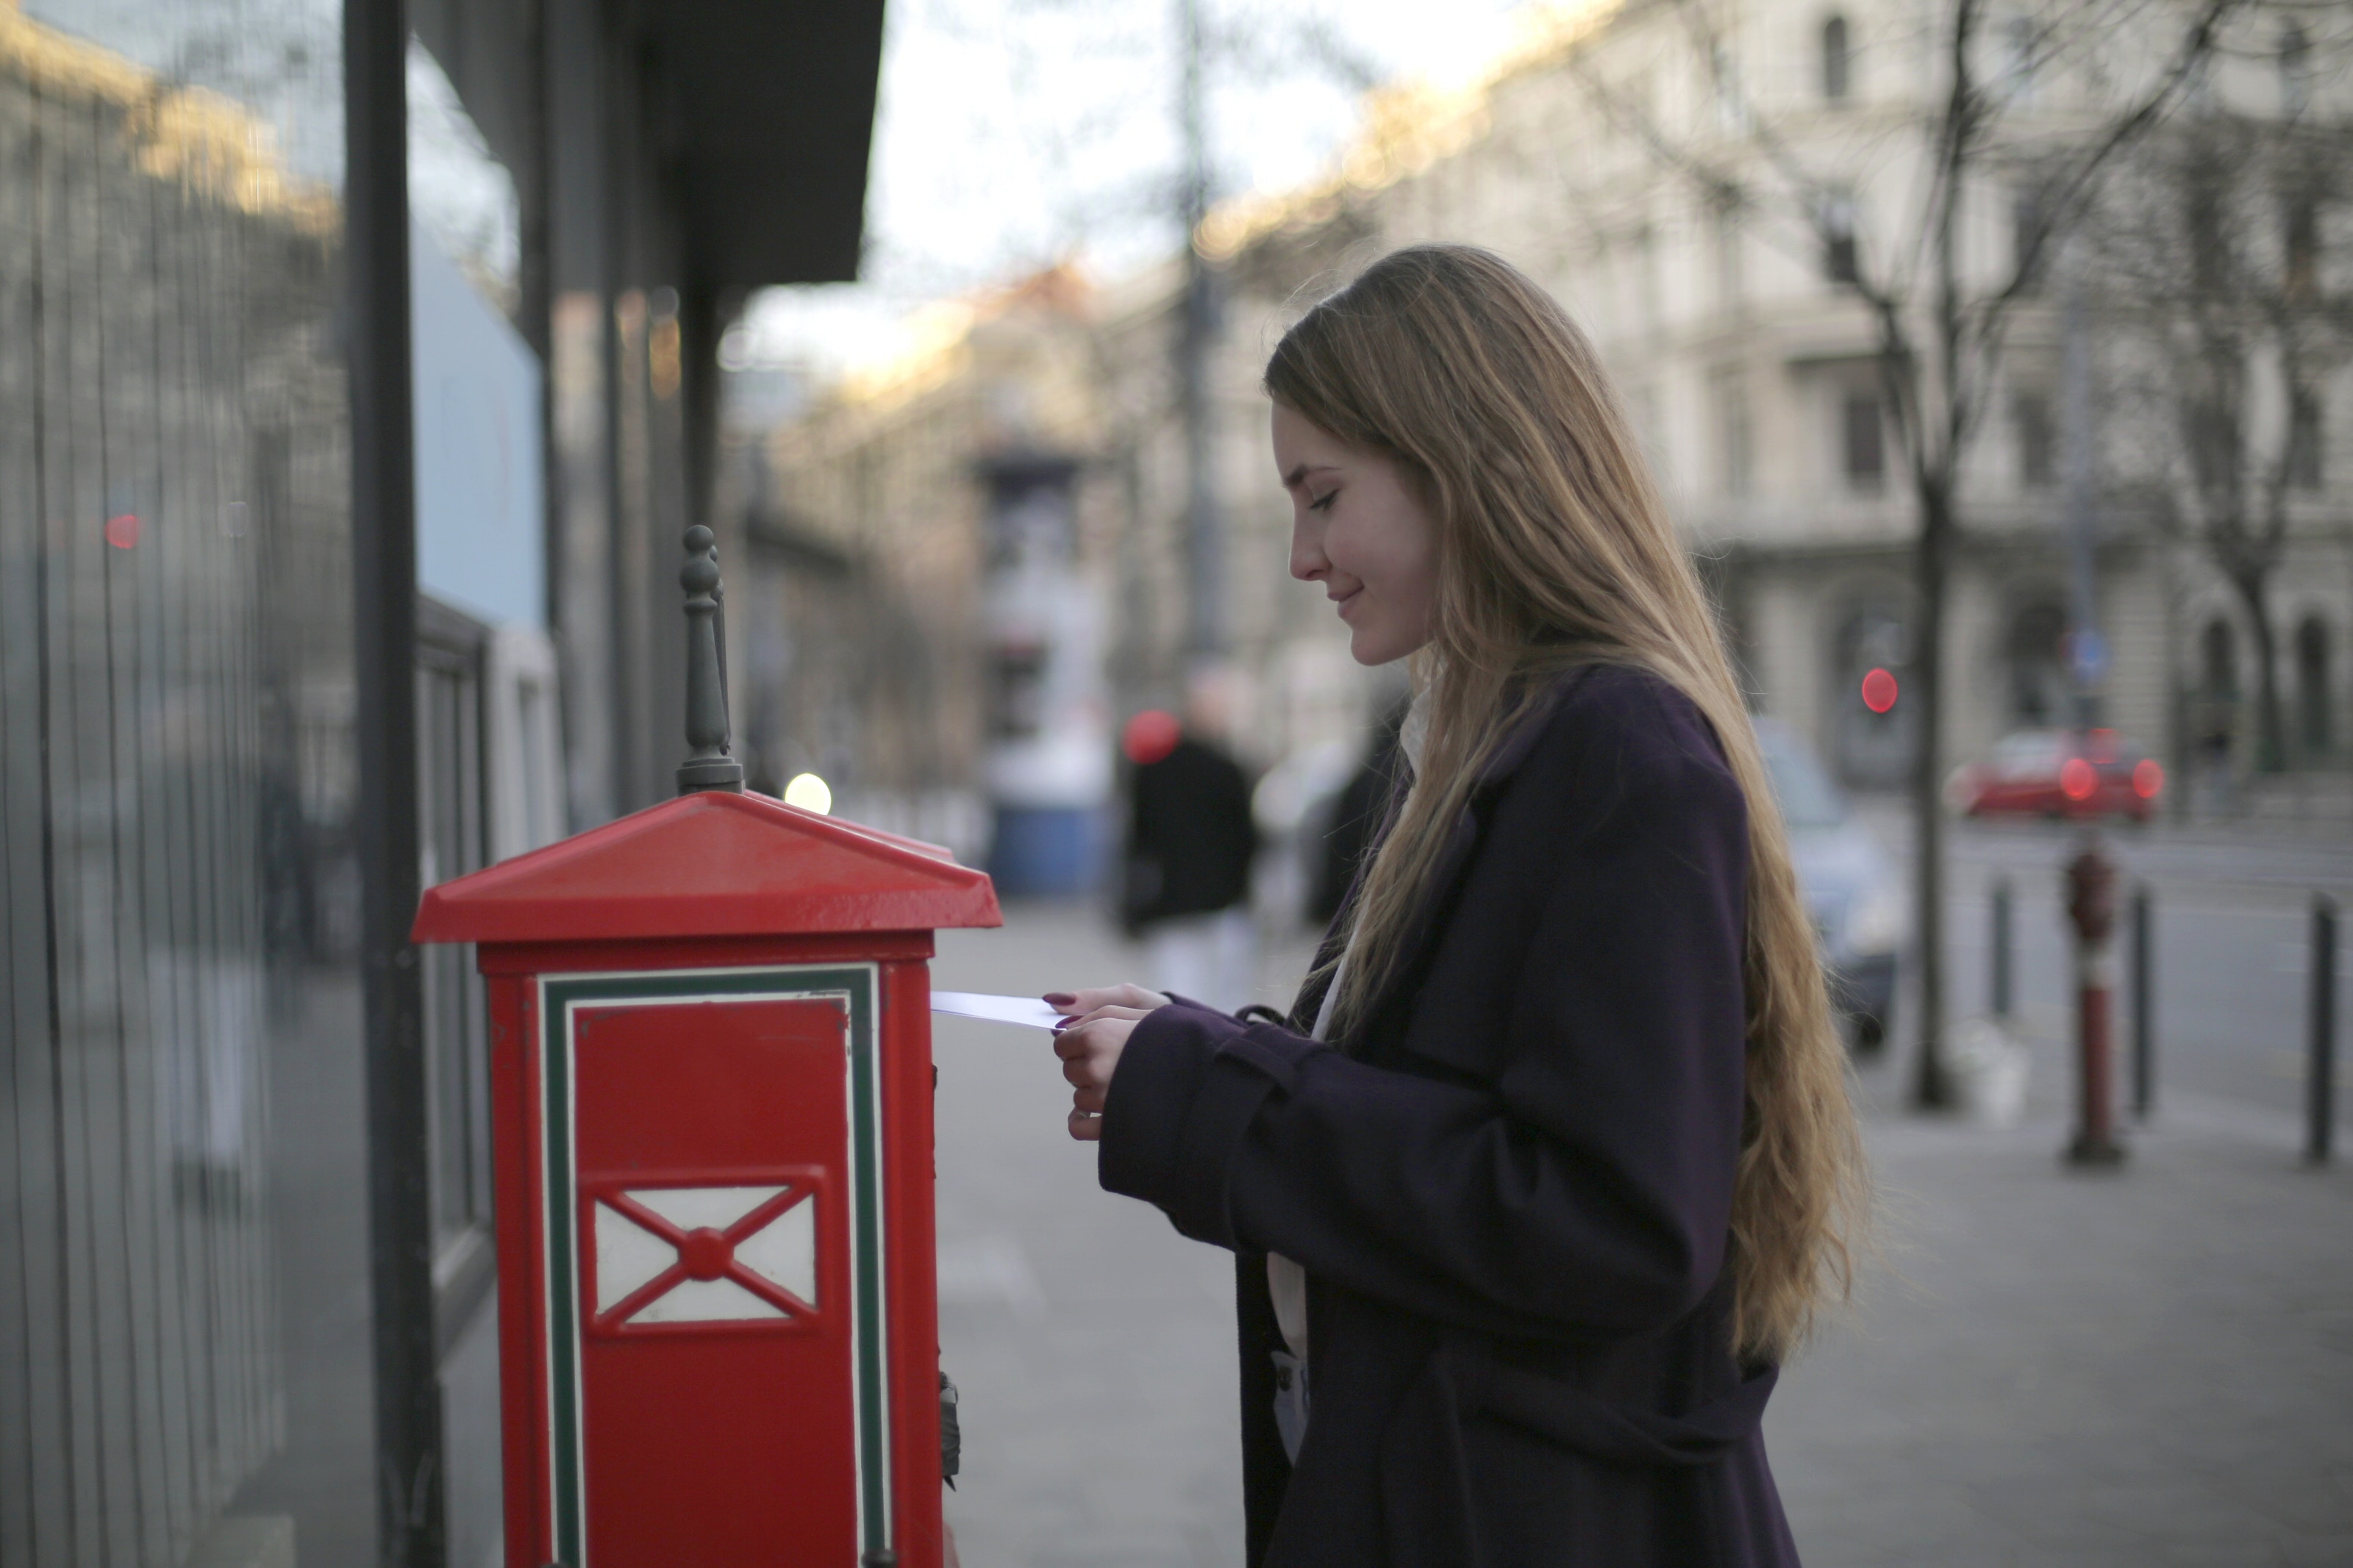  A woman dropping a list into the mailbox